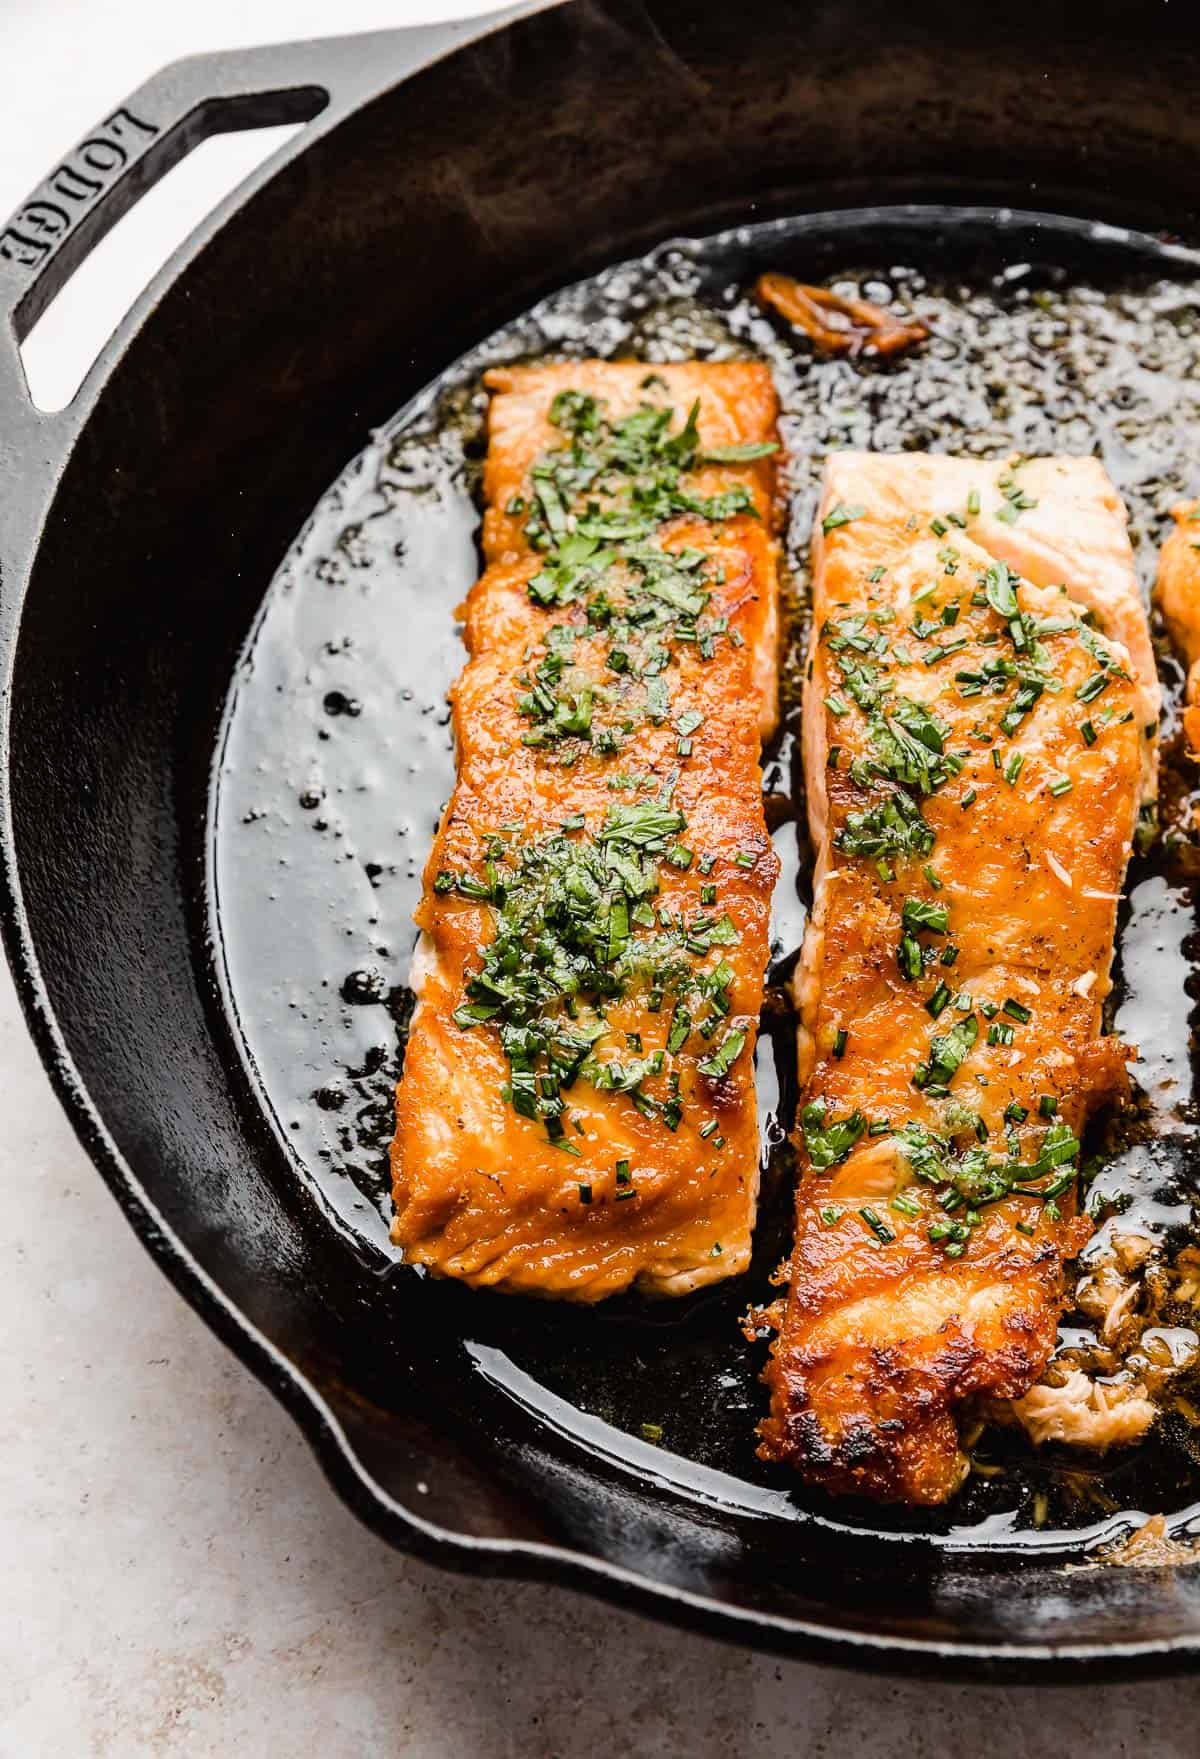 A lemon honey sauce with parsley and chives overtop cooked salmon in a black skillet.